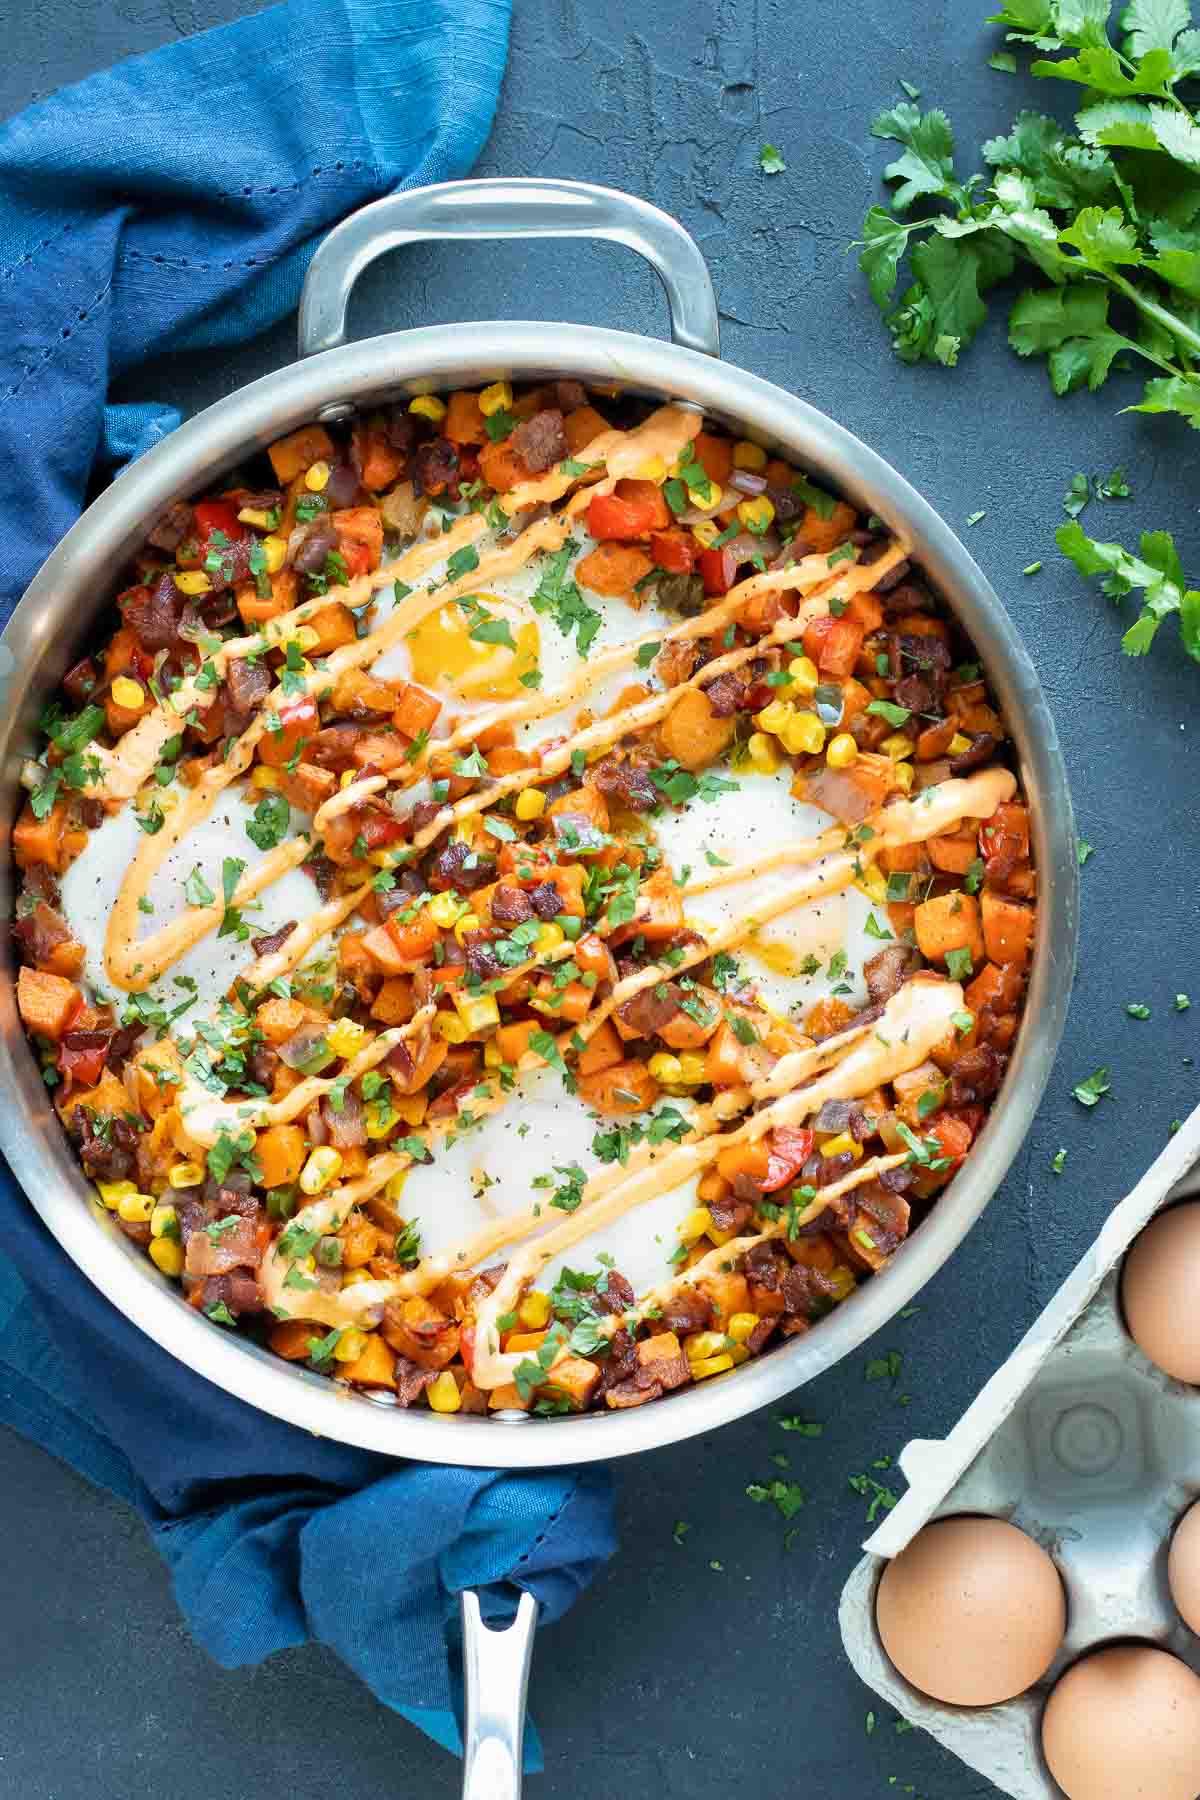 Learn how to make sweet potato hash with eggs in a stainless steel skillet.